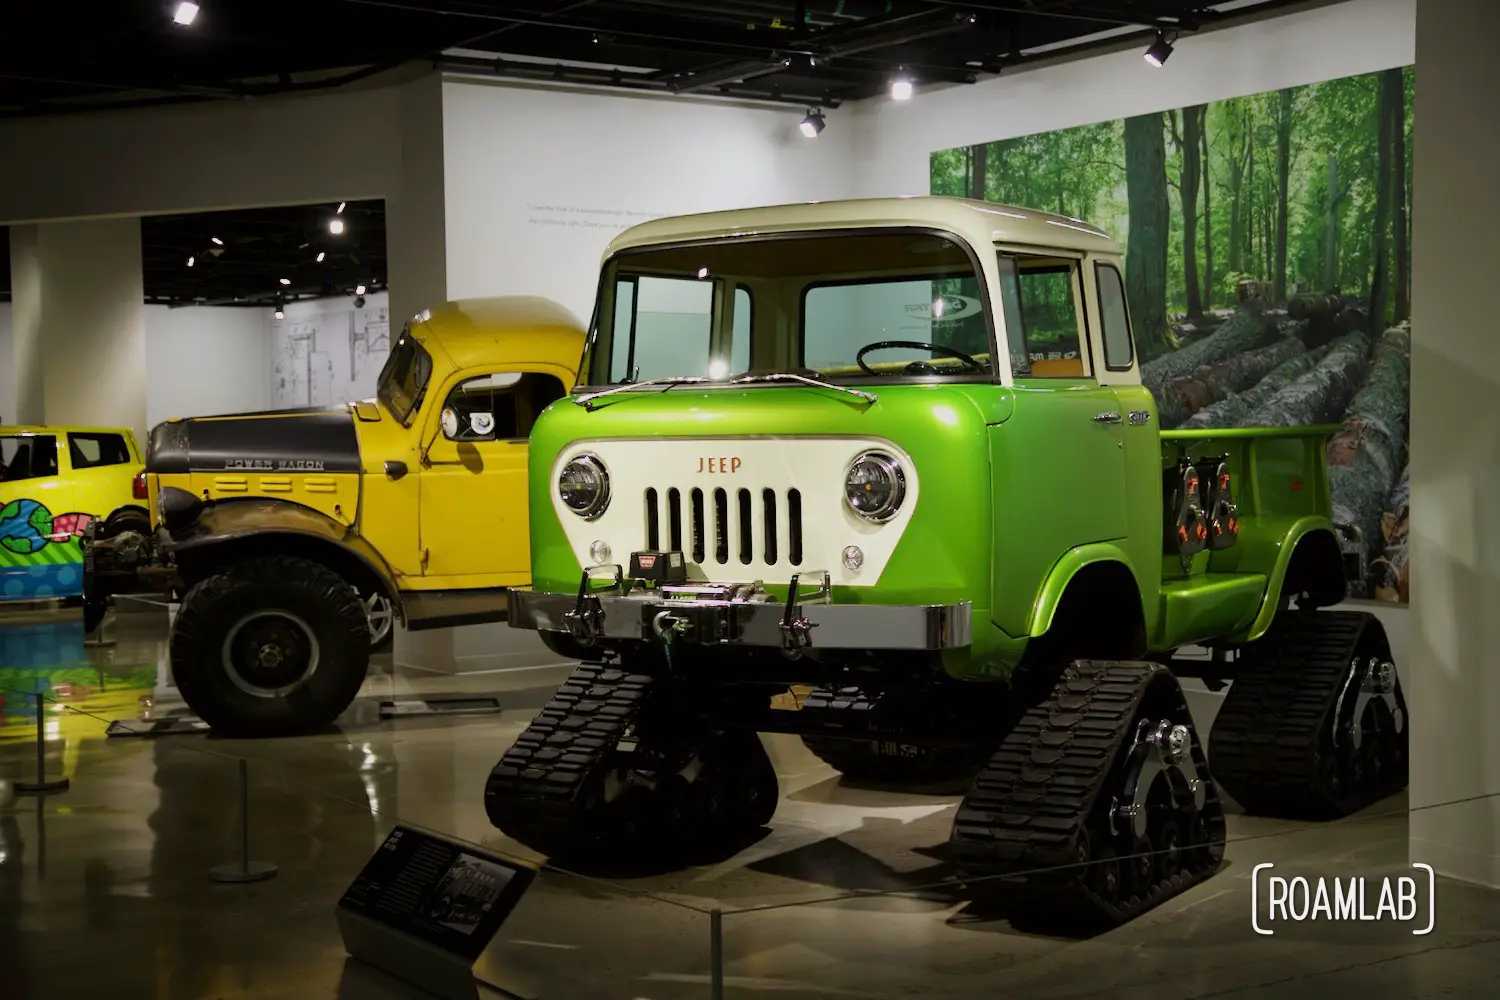 Bright green 1958 Jeep FC-170 Conversion - Petersen Automotive Museum on display at thePetersen Automotive Museum